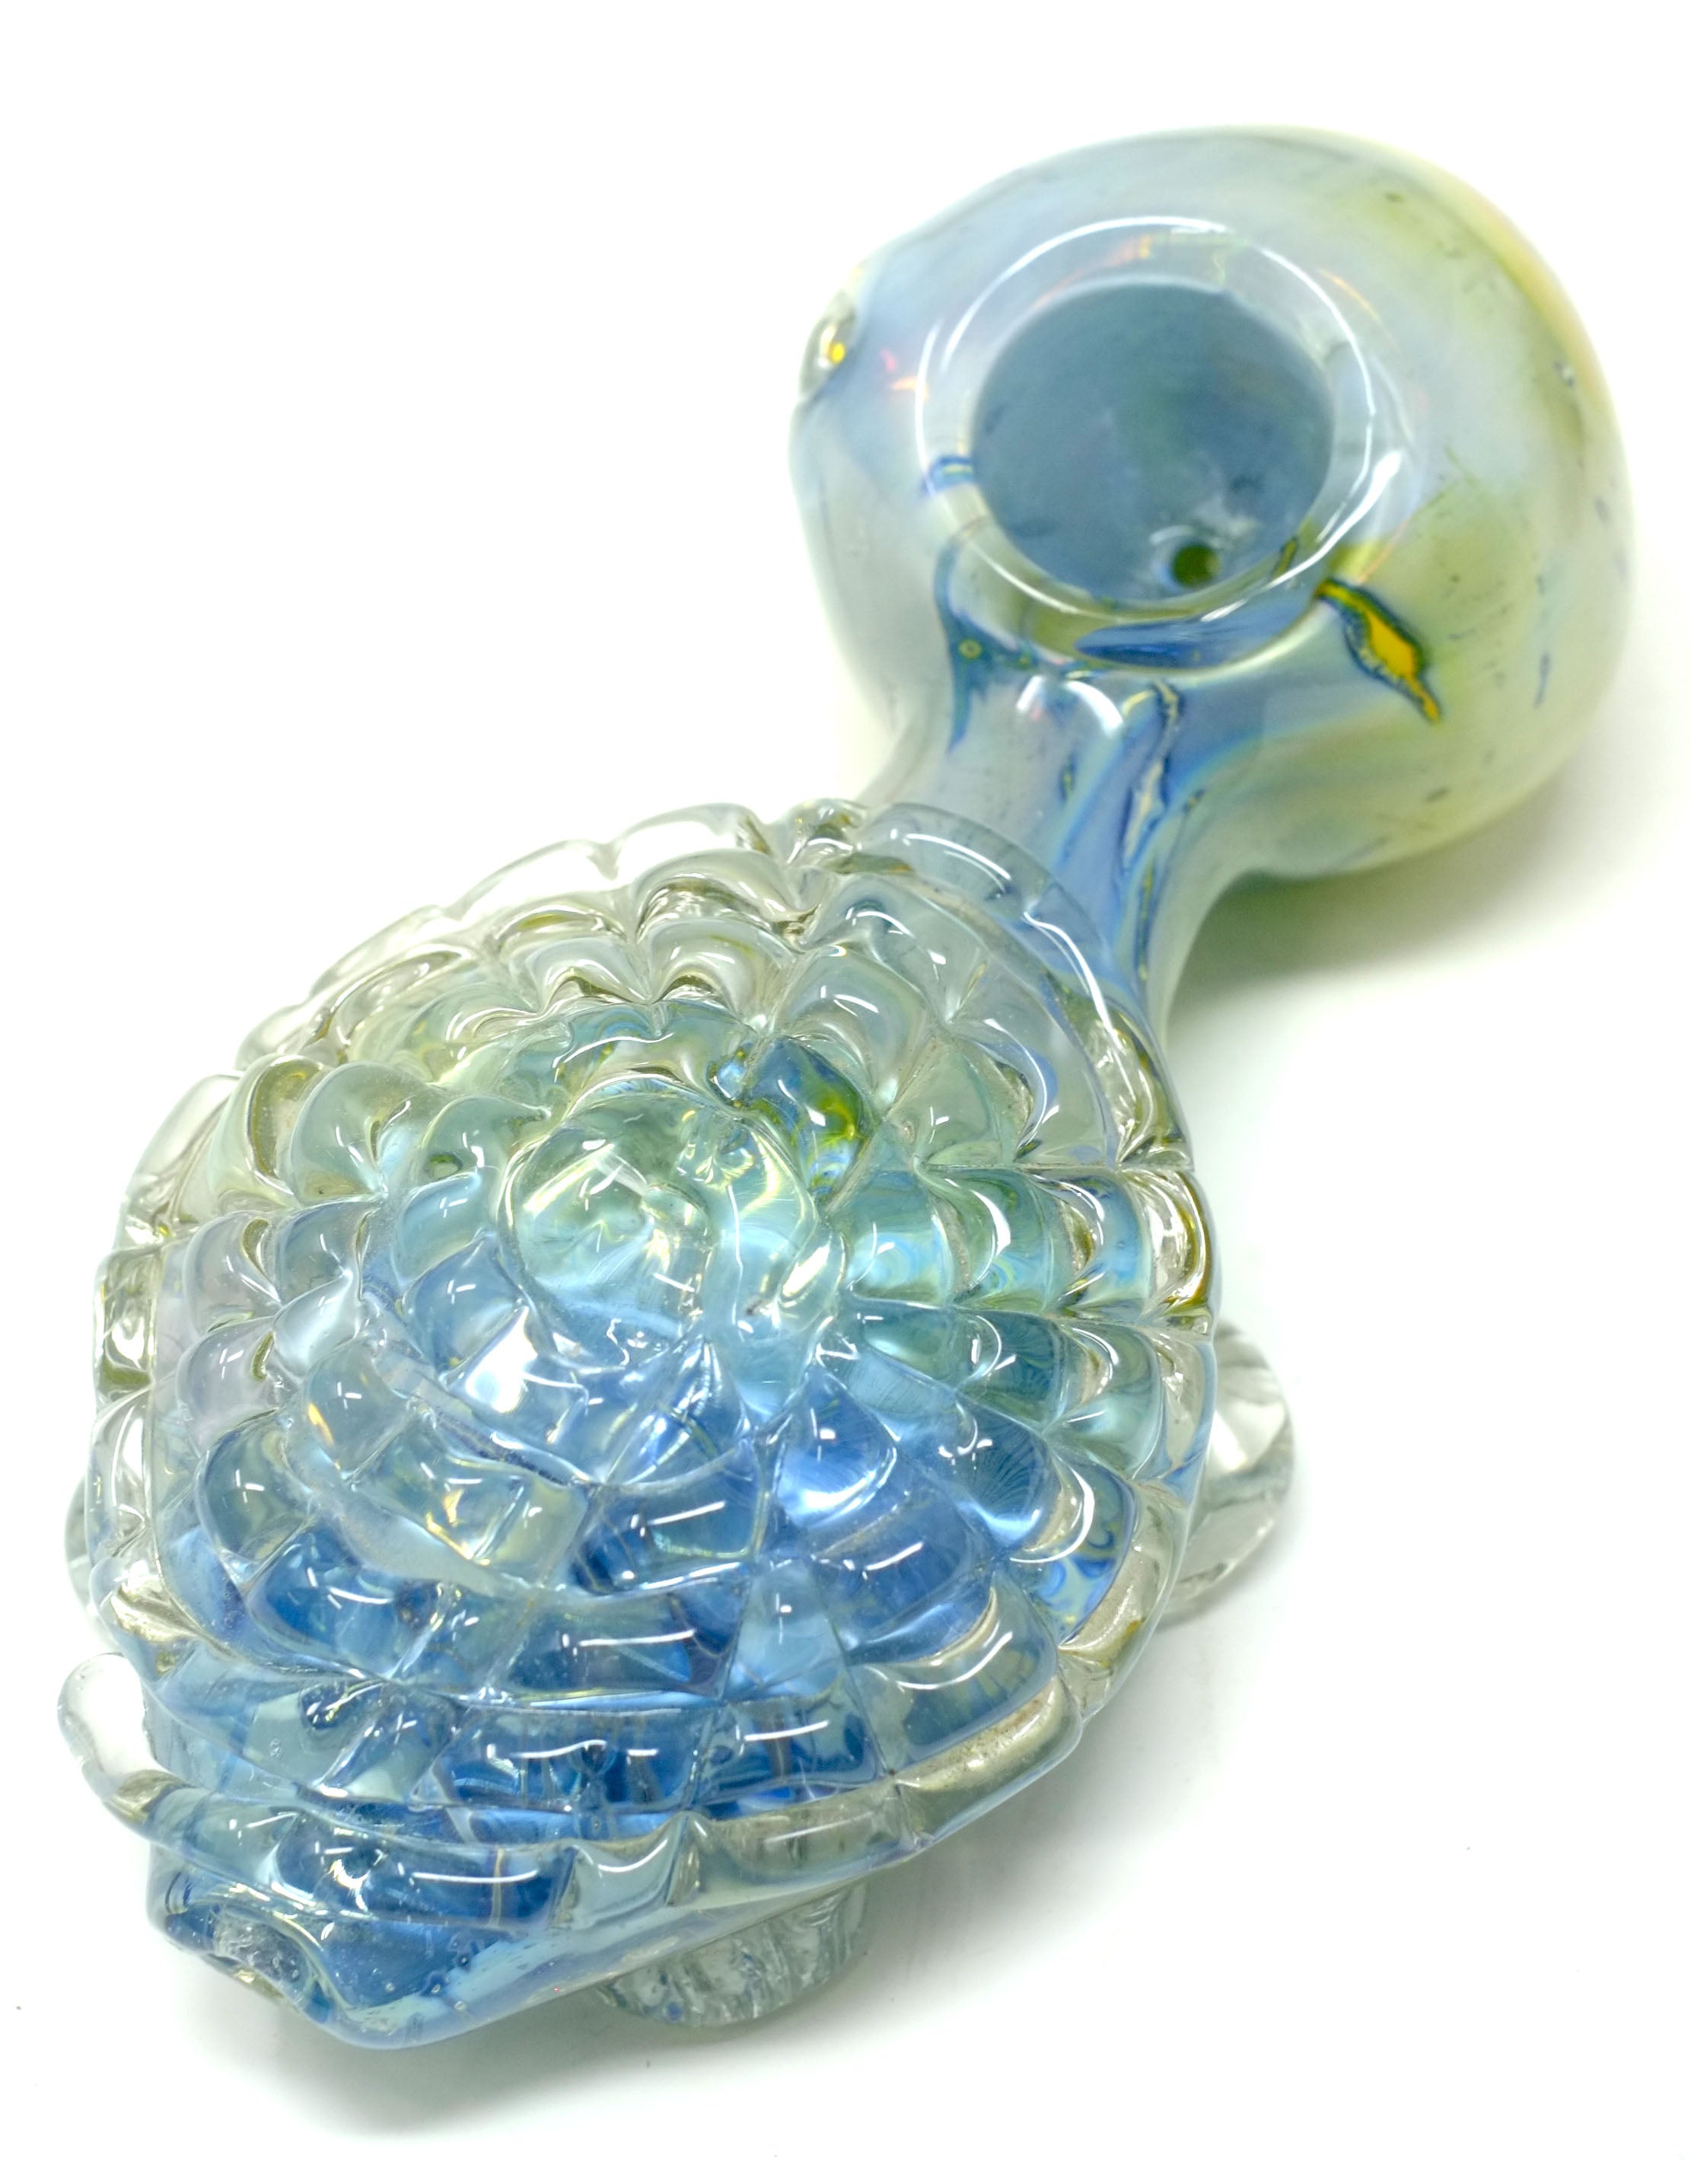 5 Green Web Design TOBACCO Thick Glass Hand Smoking Pipe w/ Carb